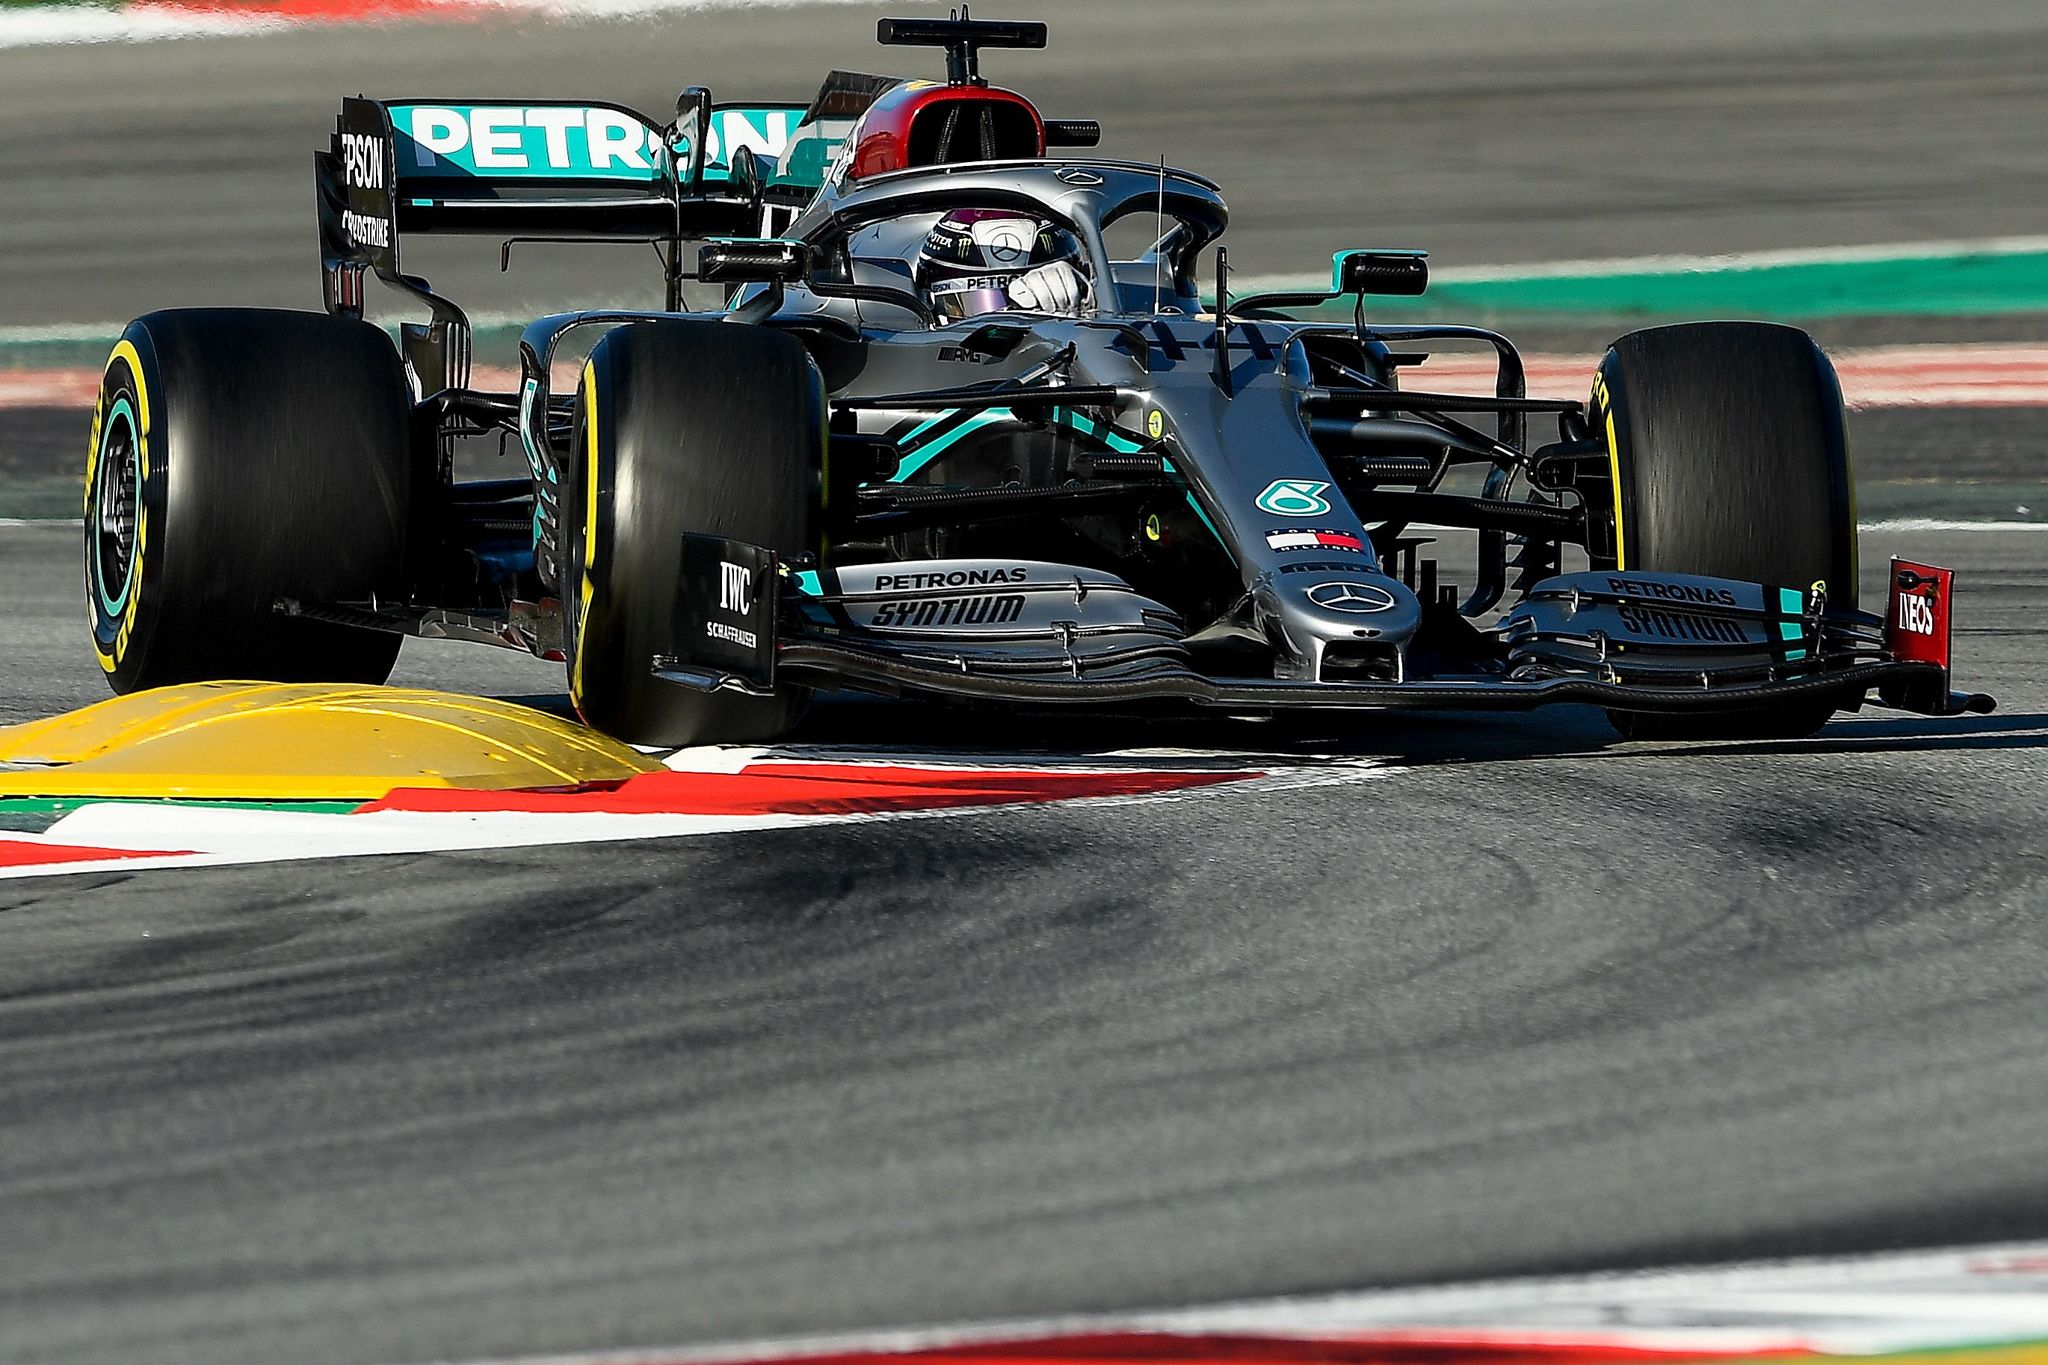  lt;HIT gt;Mercedes lt;/HIT gt; British driver Lewis Hamilton takes part in the tests for the new Formula One Grand Prix season at the Circuit de Catalunya in Montmelo in the outskirts of Barcelona on February 28, 2020. (Photo by Josep LAGO / AFP)